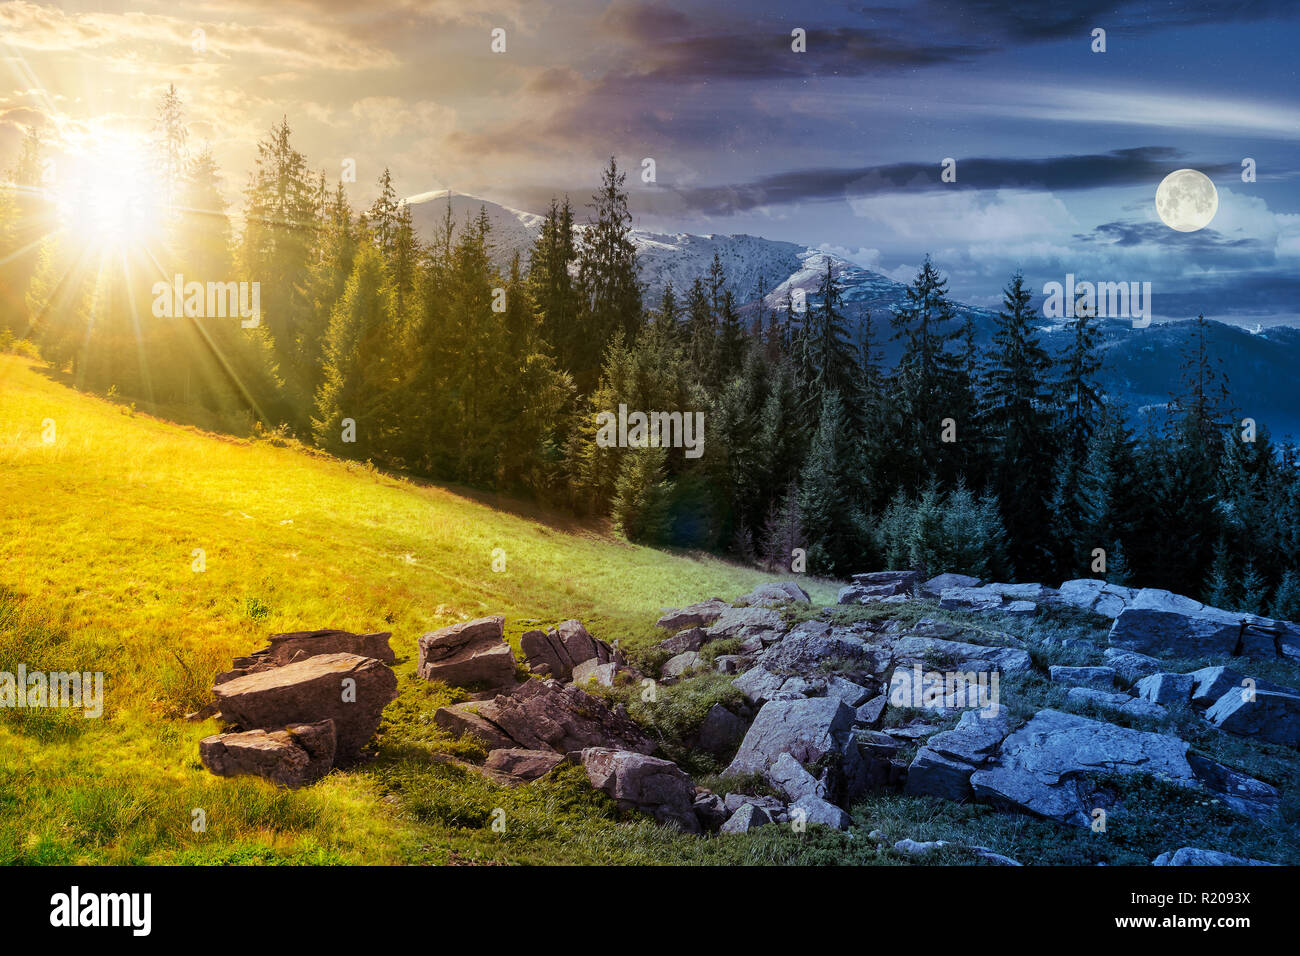 alpine summer landscape day and night time change composite. rock formation near the spruce forest on a grassy hill.  mountain with snowy top in the d Stock Photo